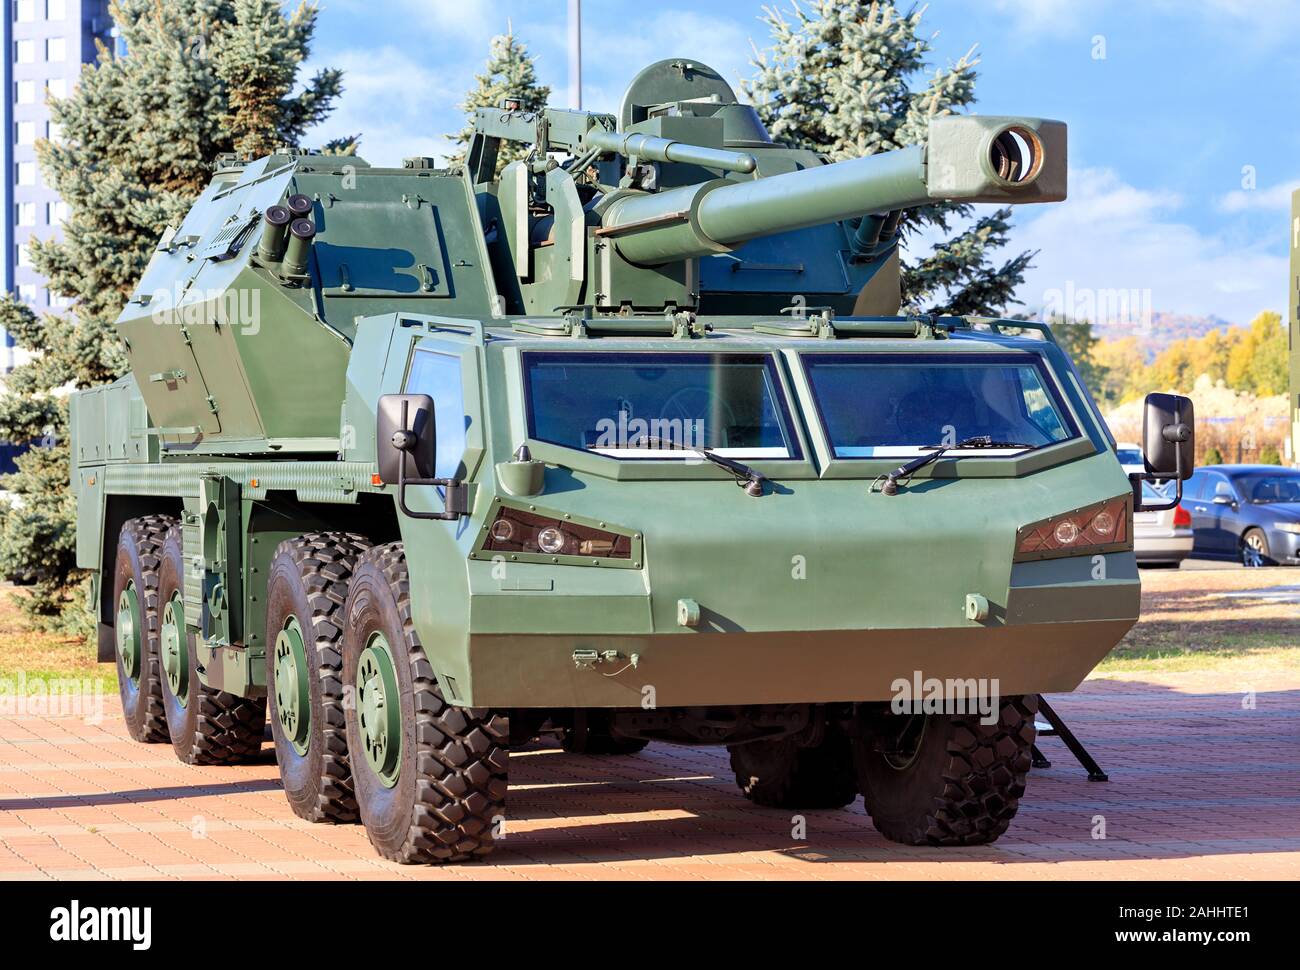 An army military vehicle with artillery anti-aircraft gun and guided missiles on board is parked in a car park on a bright summer day. Stock Photo